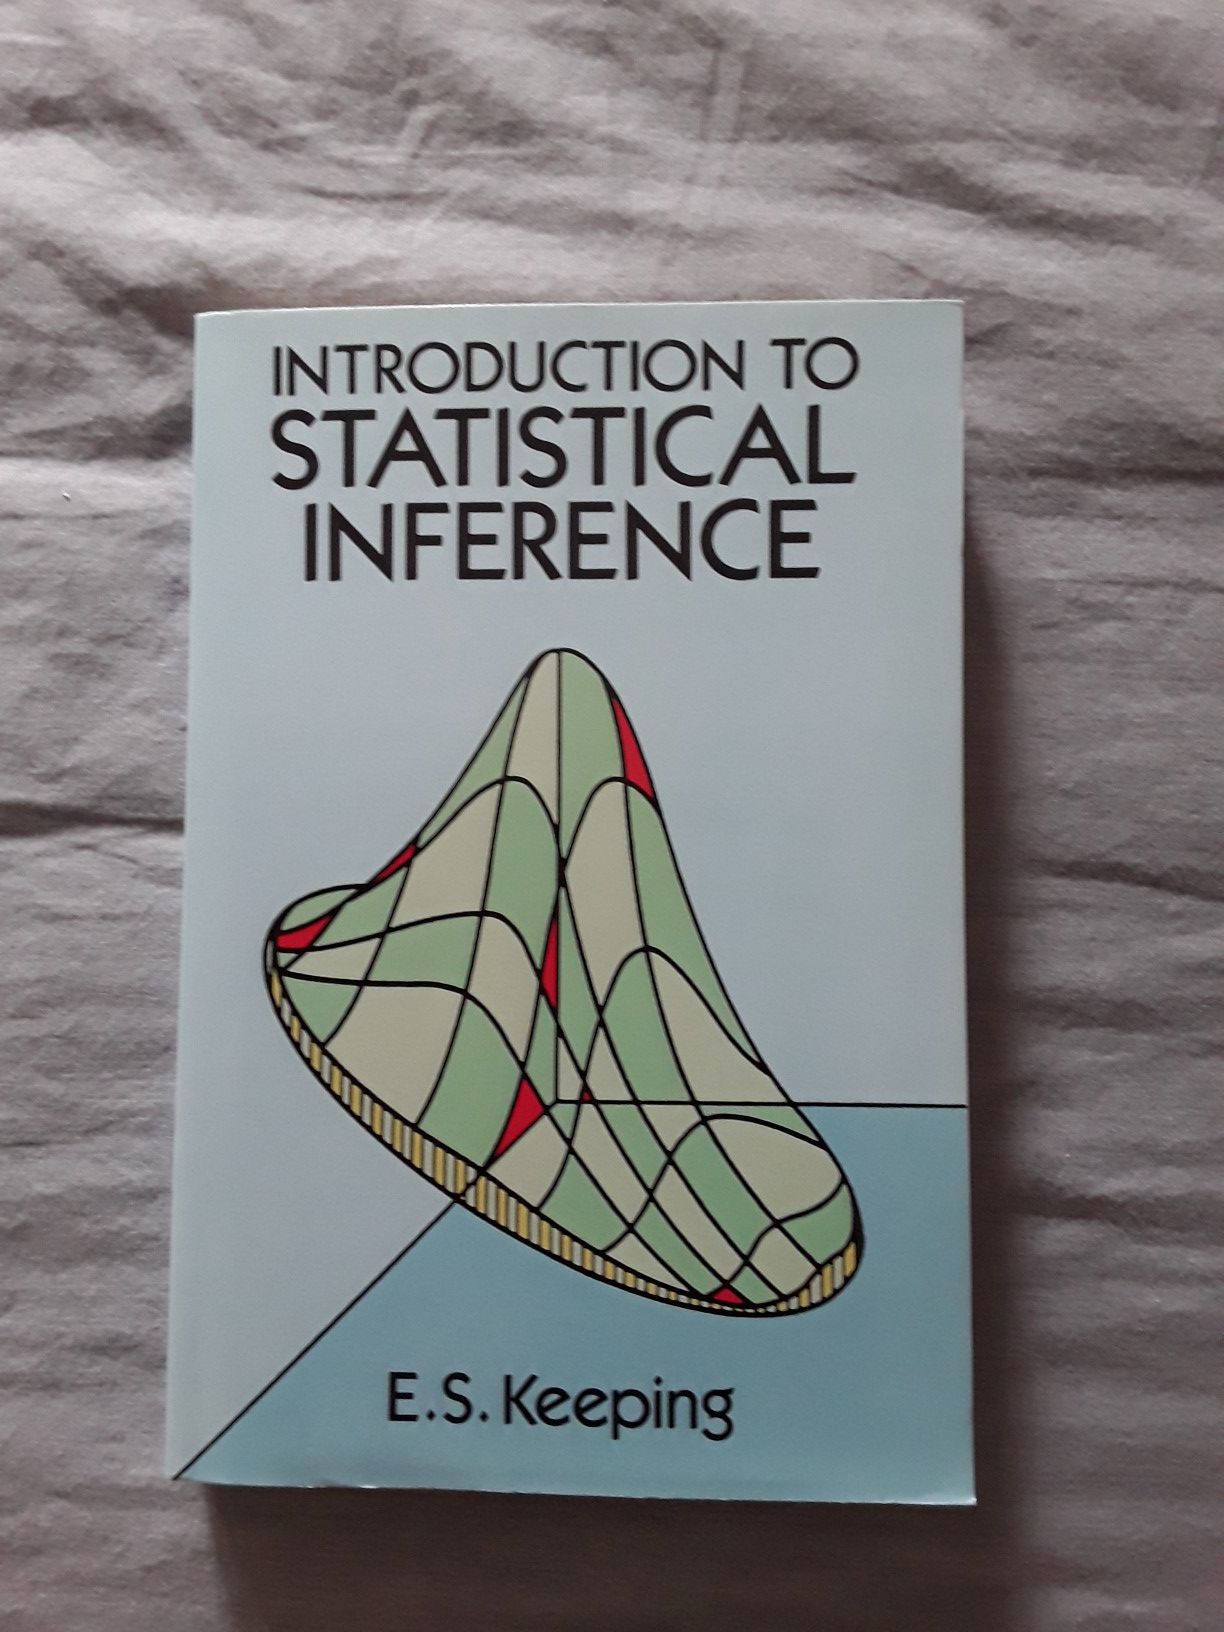 Introduction to statistical inference